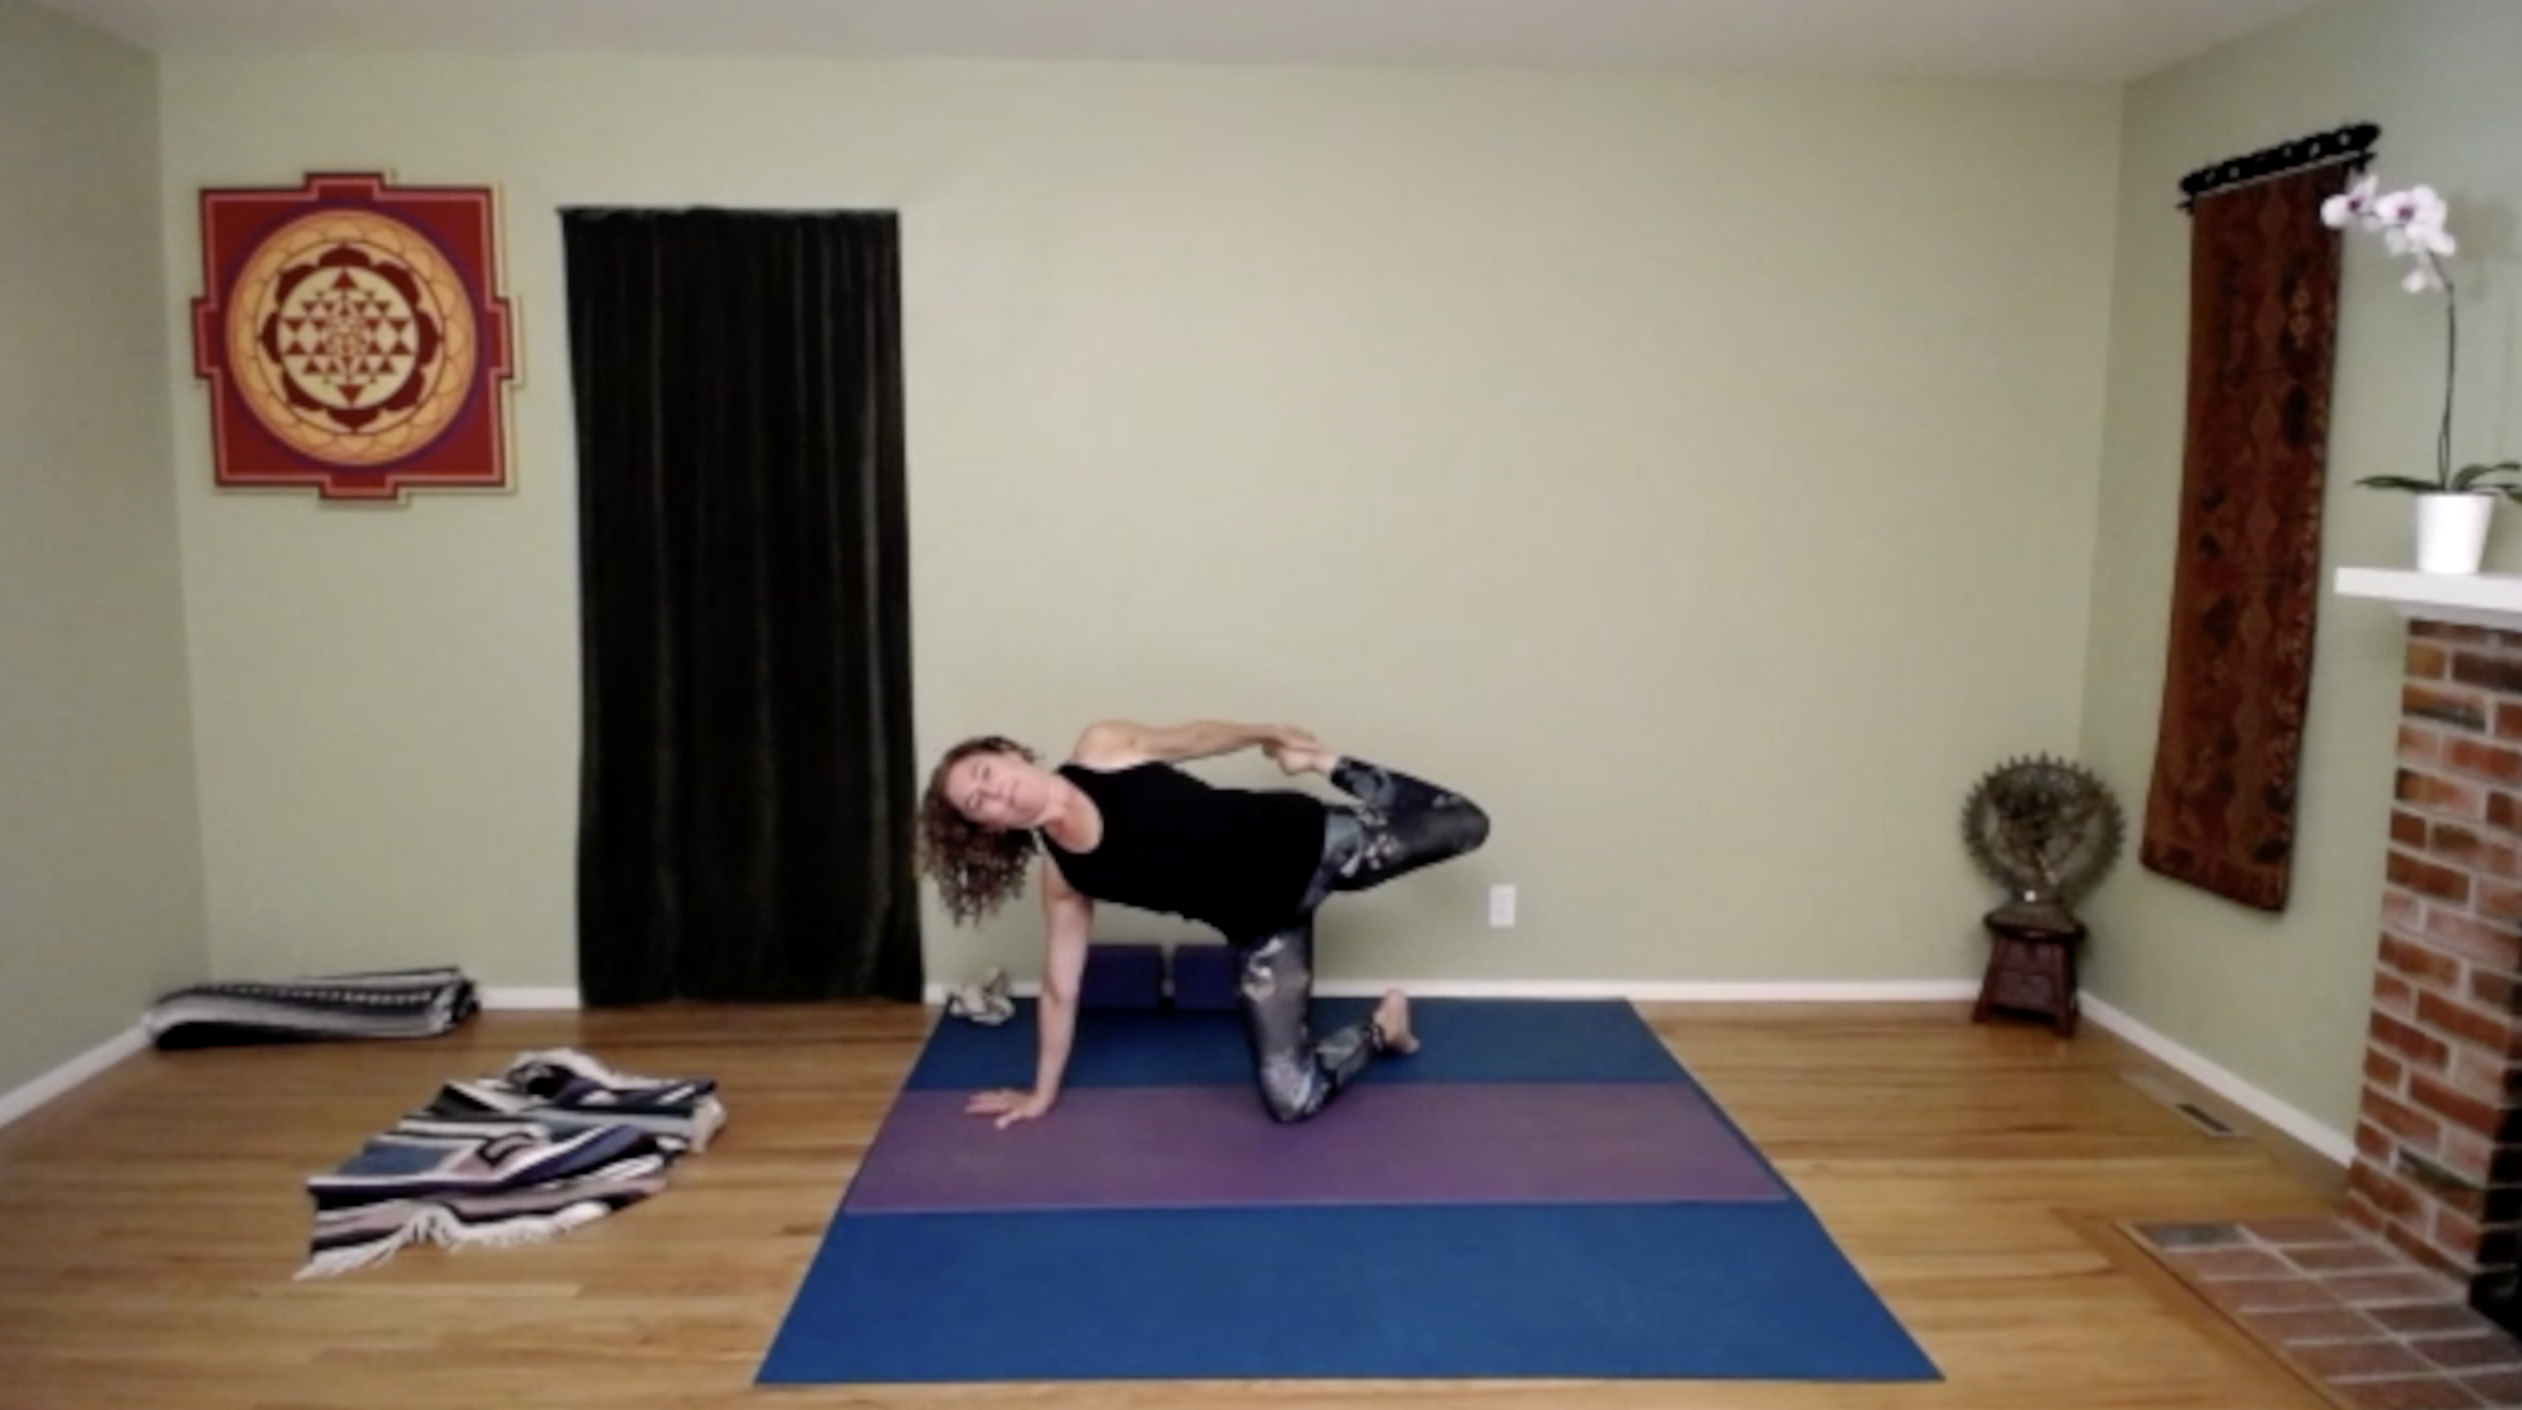 april marant recommends yoga challenge jenna marbles pic